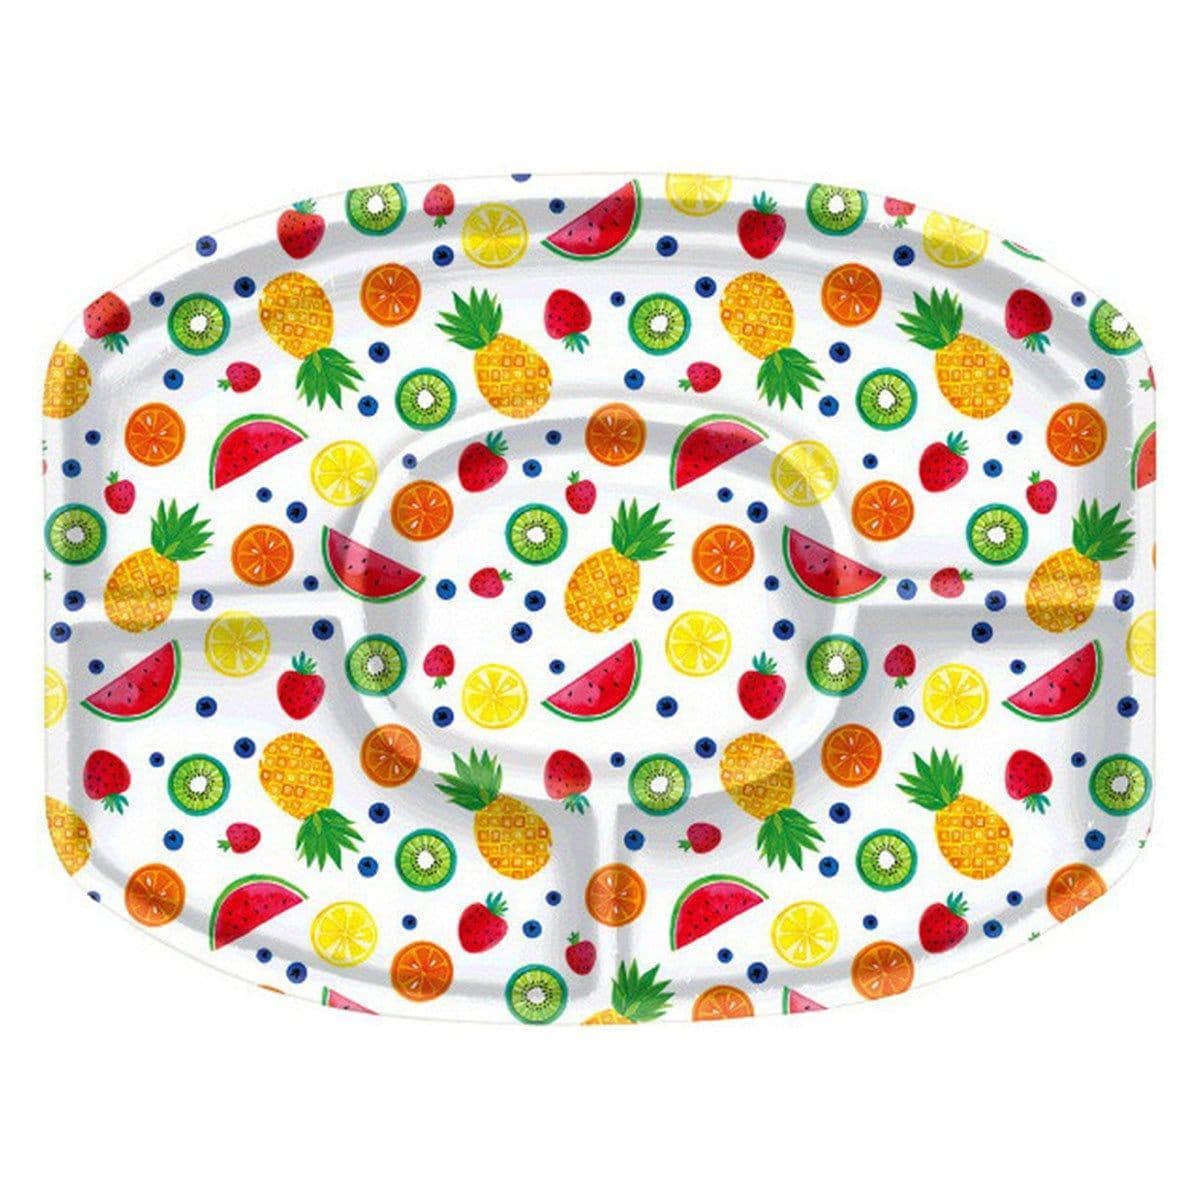 Buy Summer Tutti Frutti sectional platter sold at Party Expert